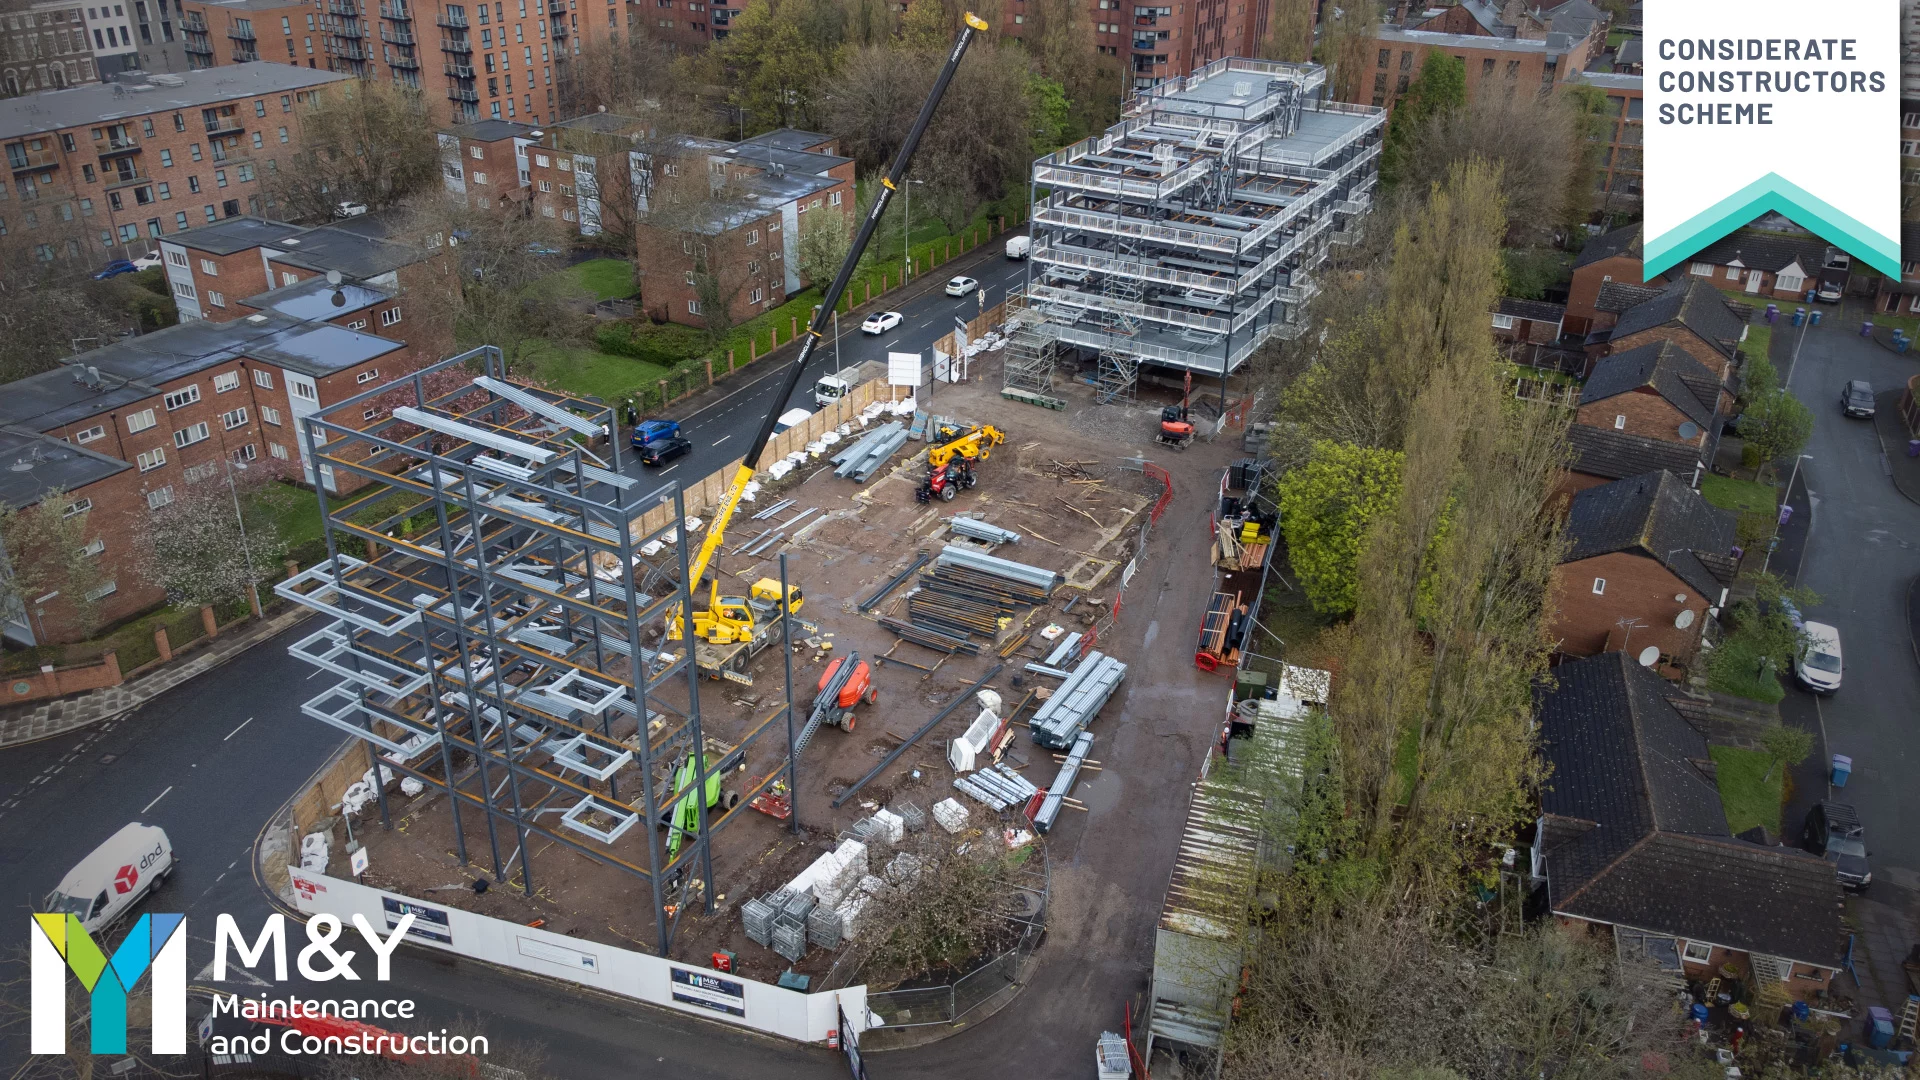 A birds eye view of Grove Street development in Liverpool, showing a site in mid development with steel frames raising three stores. M&Y Maintenance and Construction logo to the bottom left and the Considerate Construction Scheme logo to the top right.